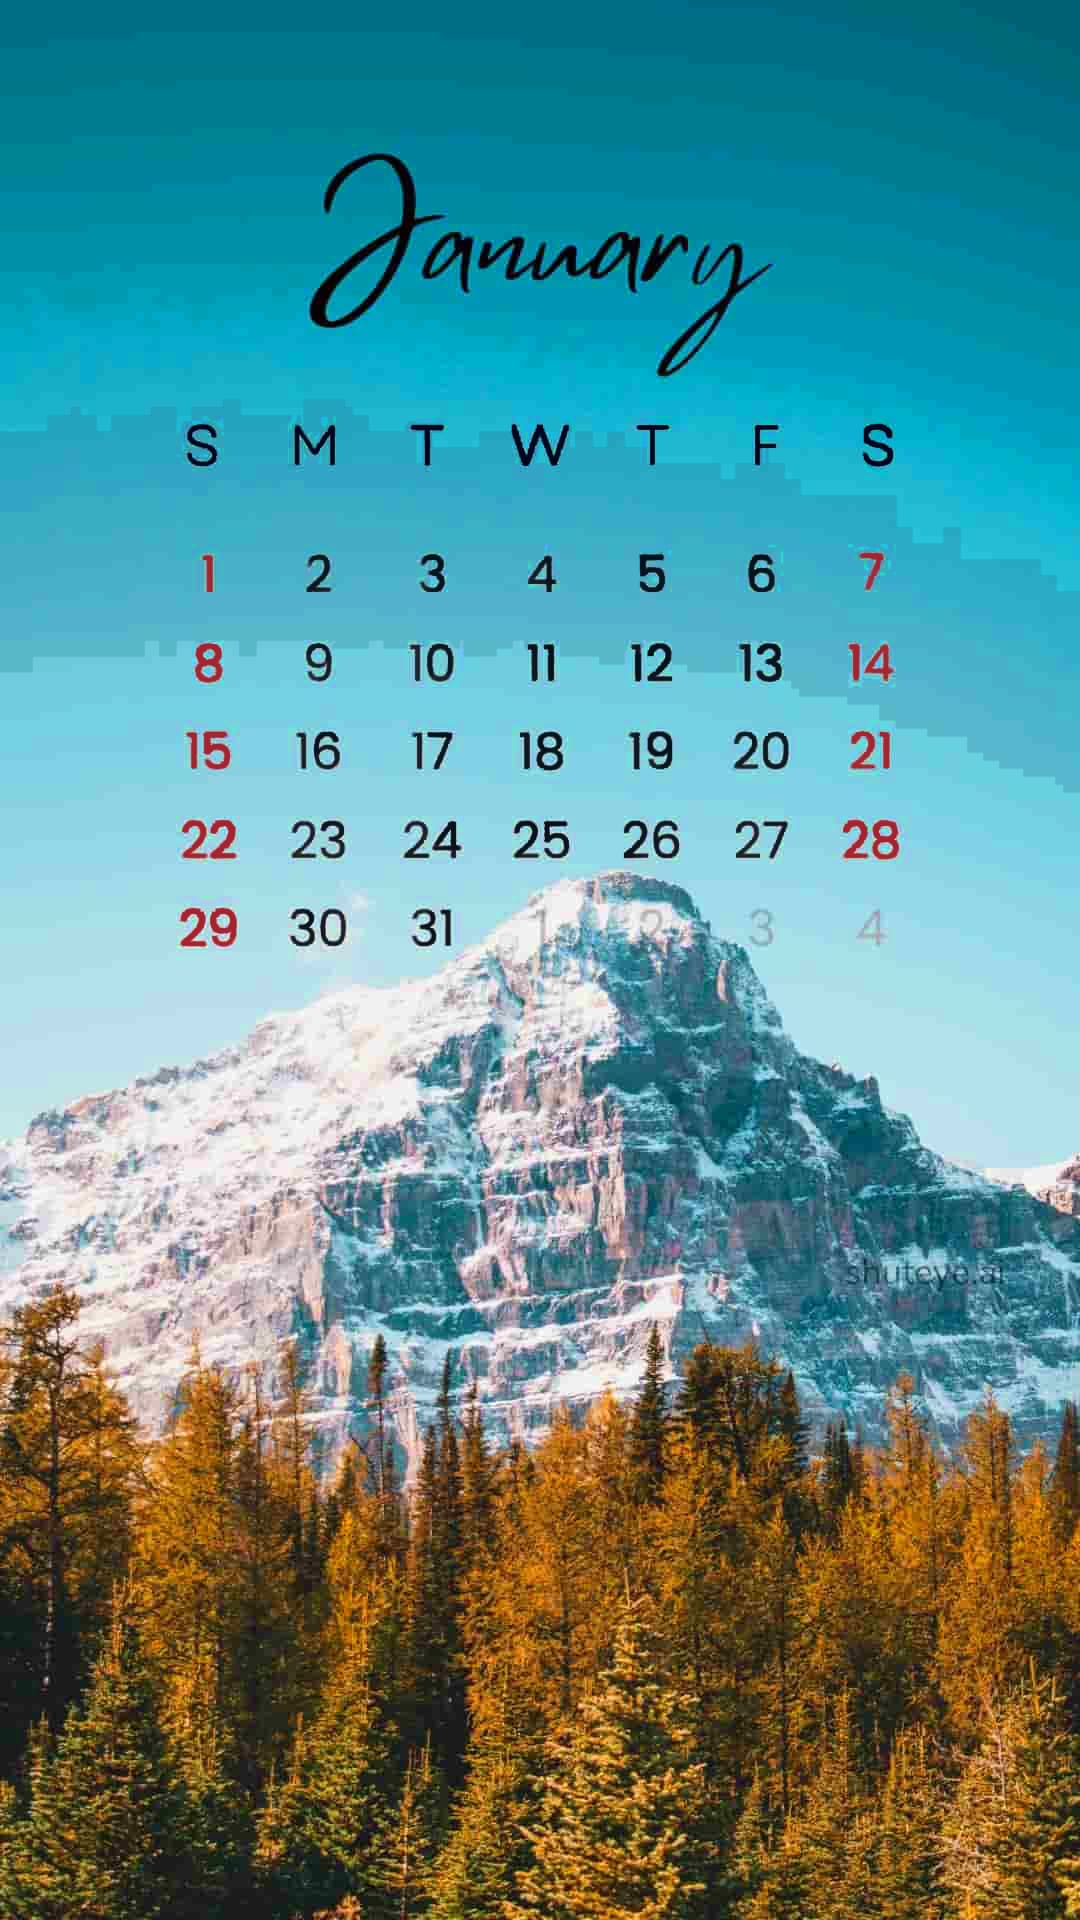 January 2023 Wallpapers